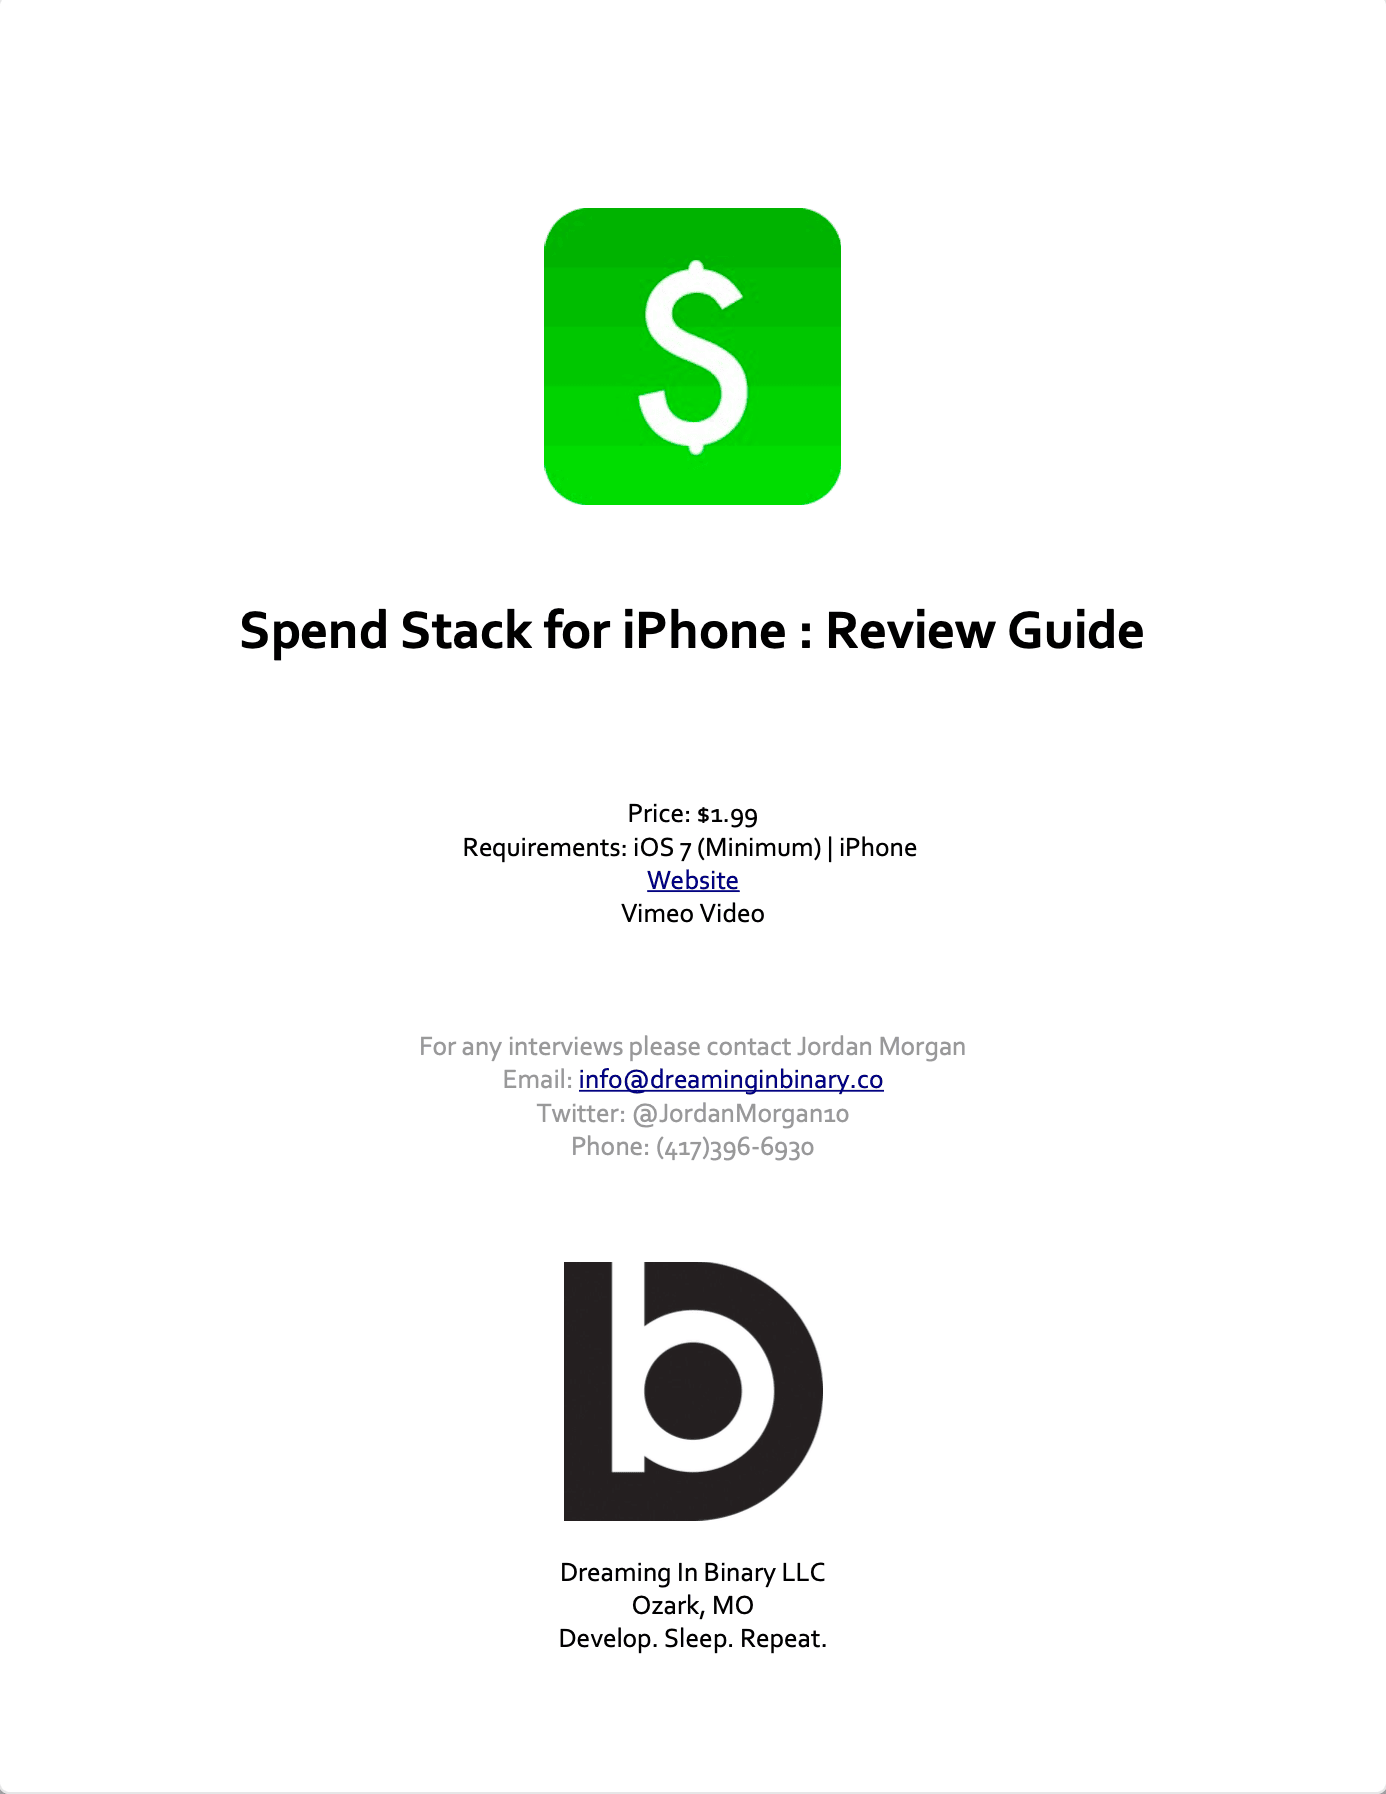 A screenshot of Spend Stack from 2011's press kit .pdf.